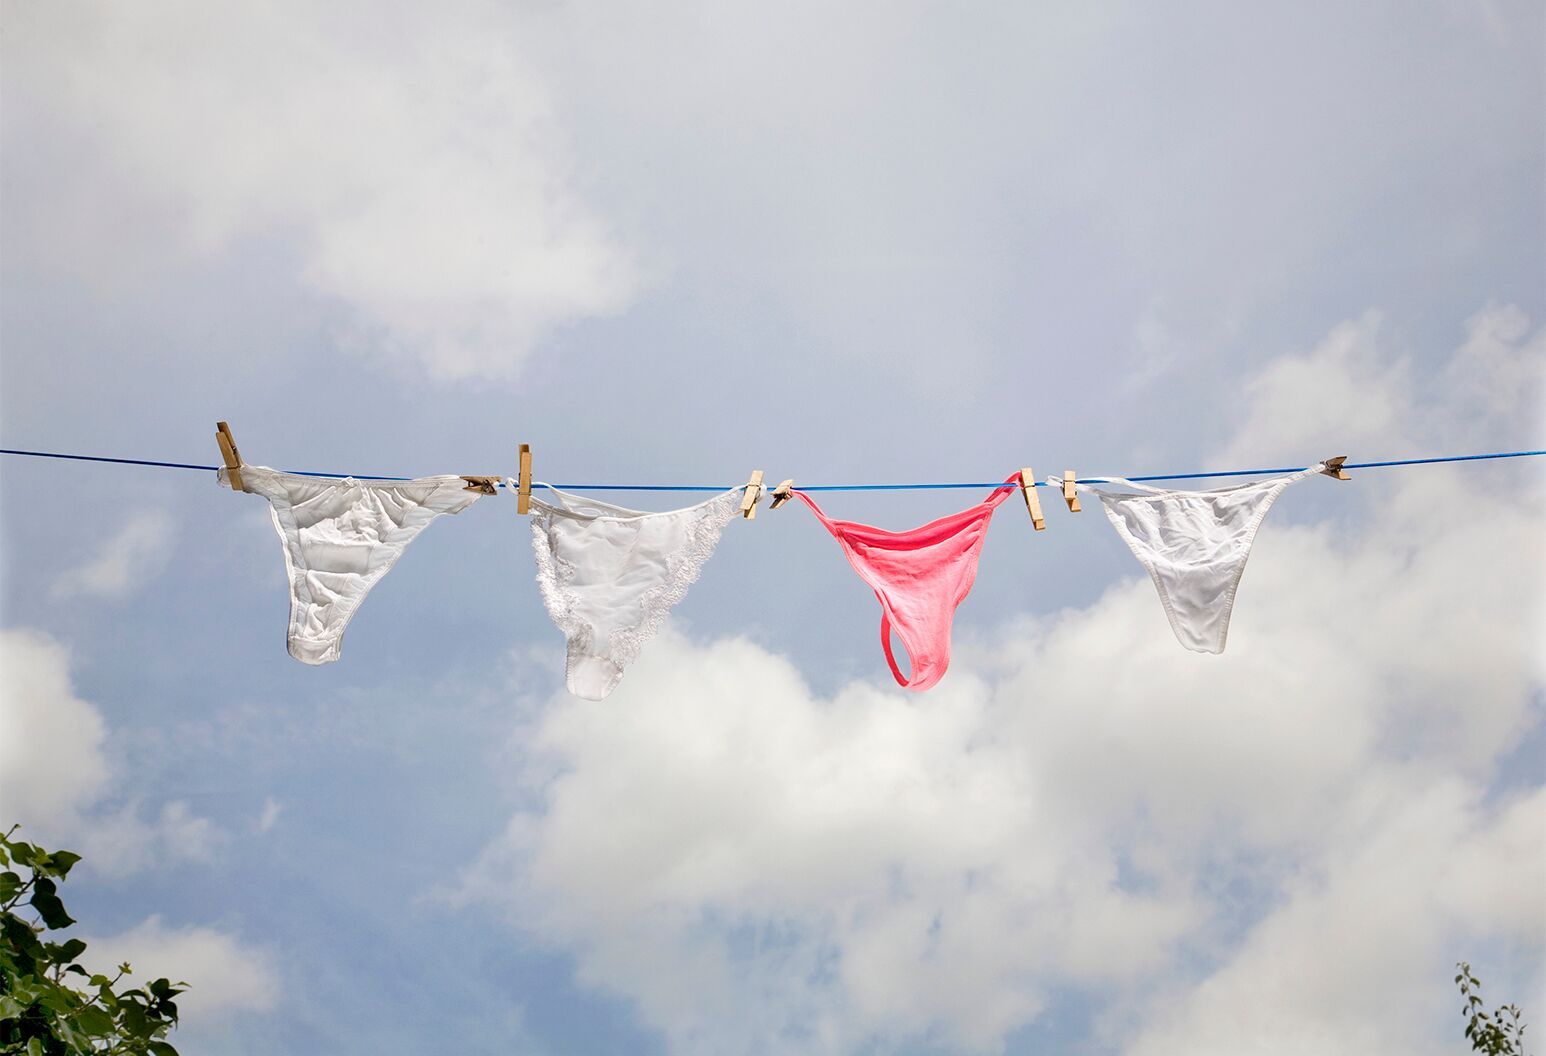 What Is Period Underwear and Does It Work?